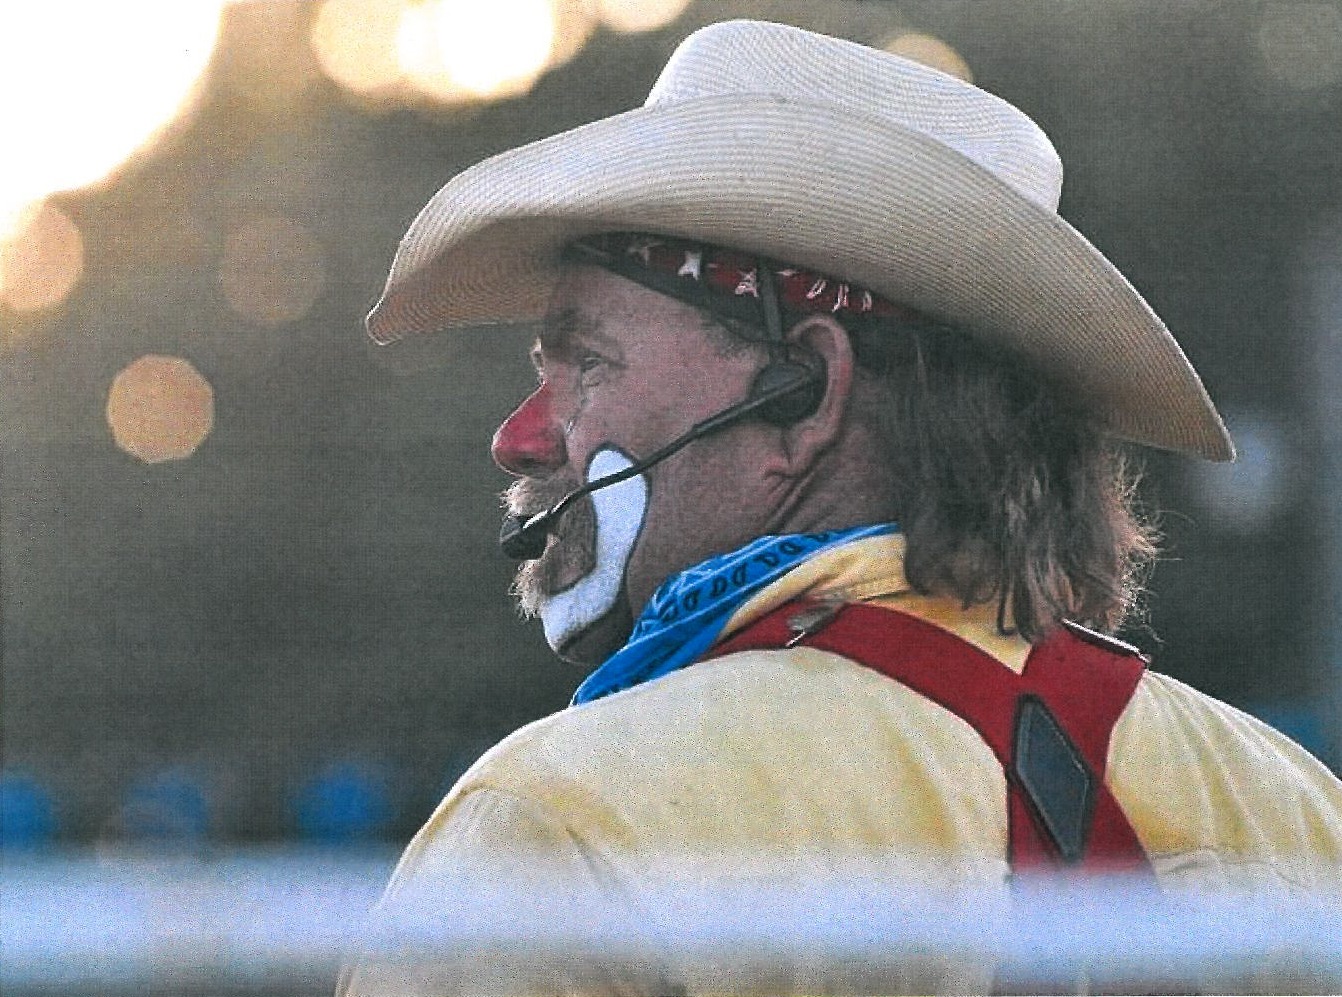 Rodeo clown-funnyman Bob Courtney, Branson, Missouri, will entertain and help save cowboys from mean bulls at the 45th annual Santa Fe Trail Rodeo, Friday and Saturday evenings, May 15-16, in Burlingame.